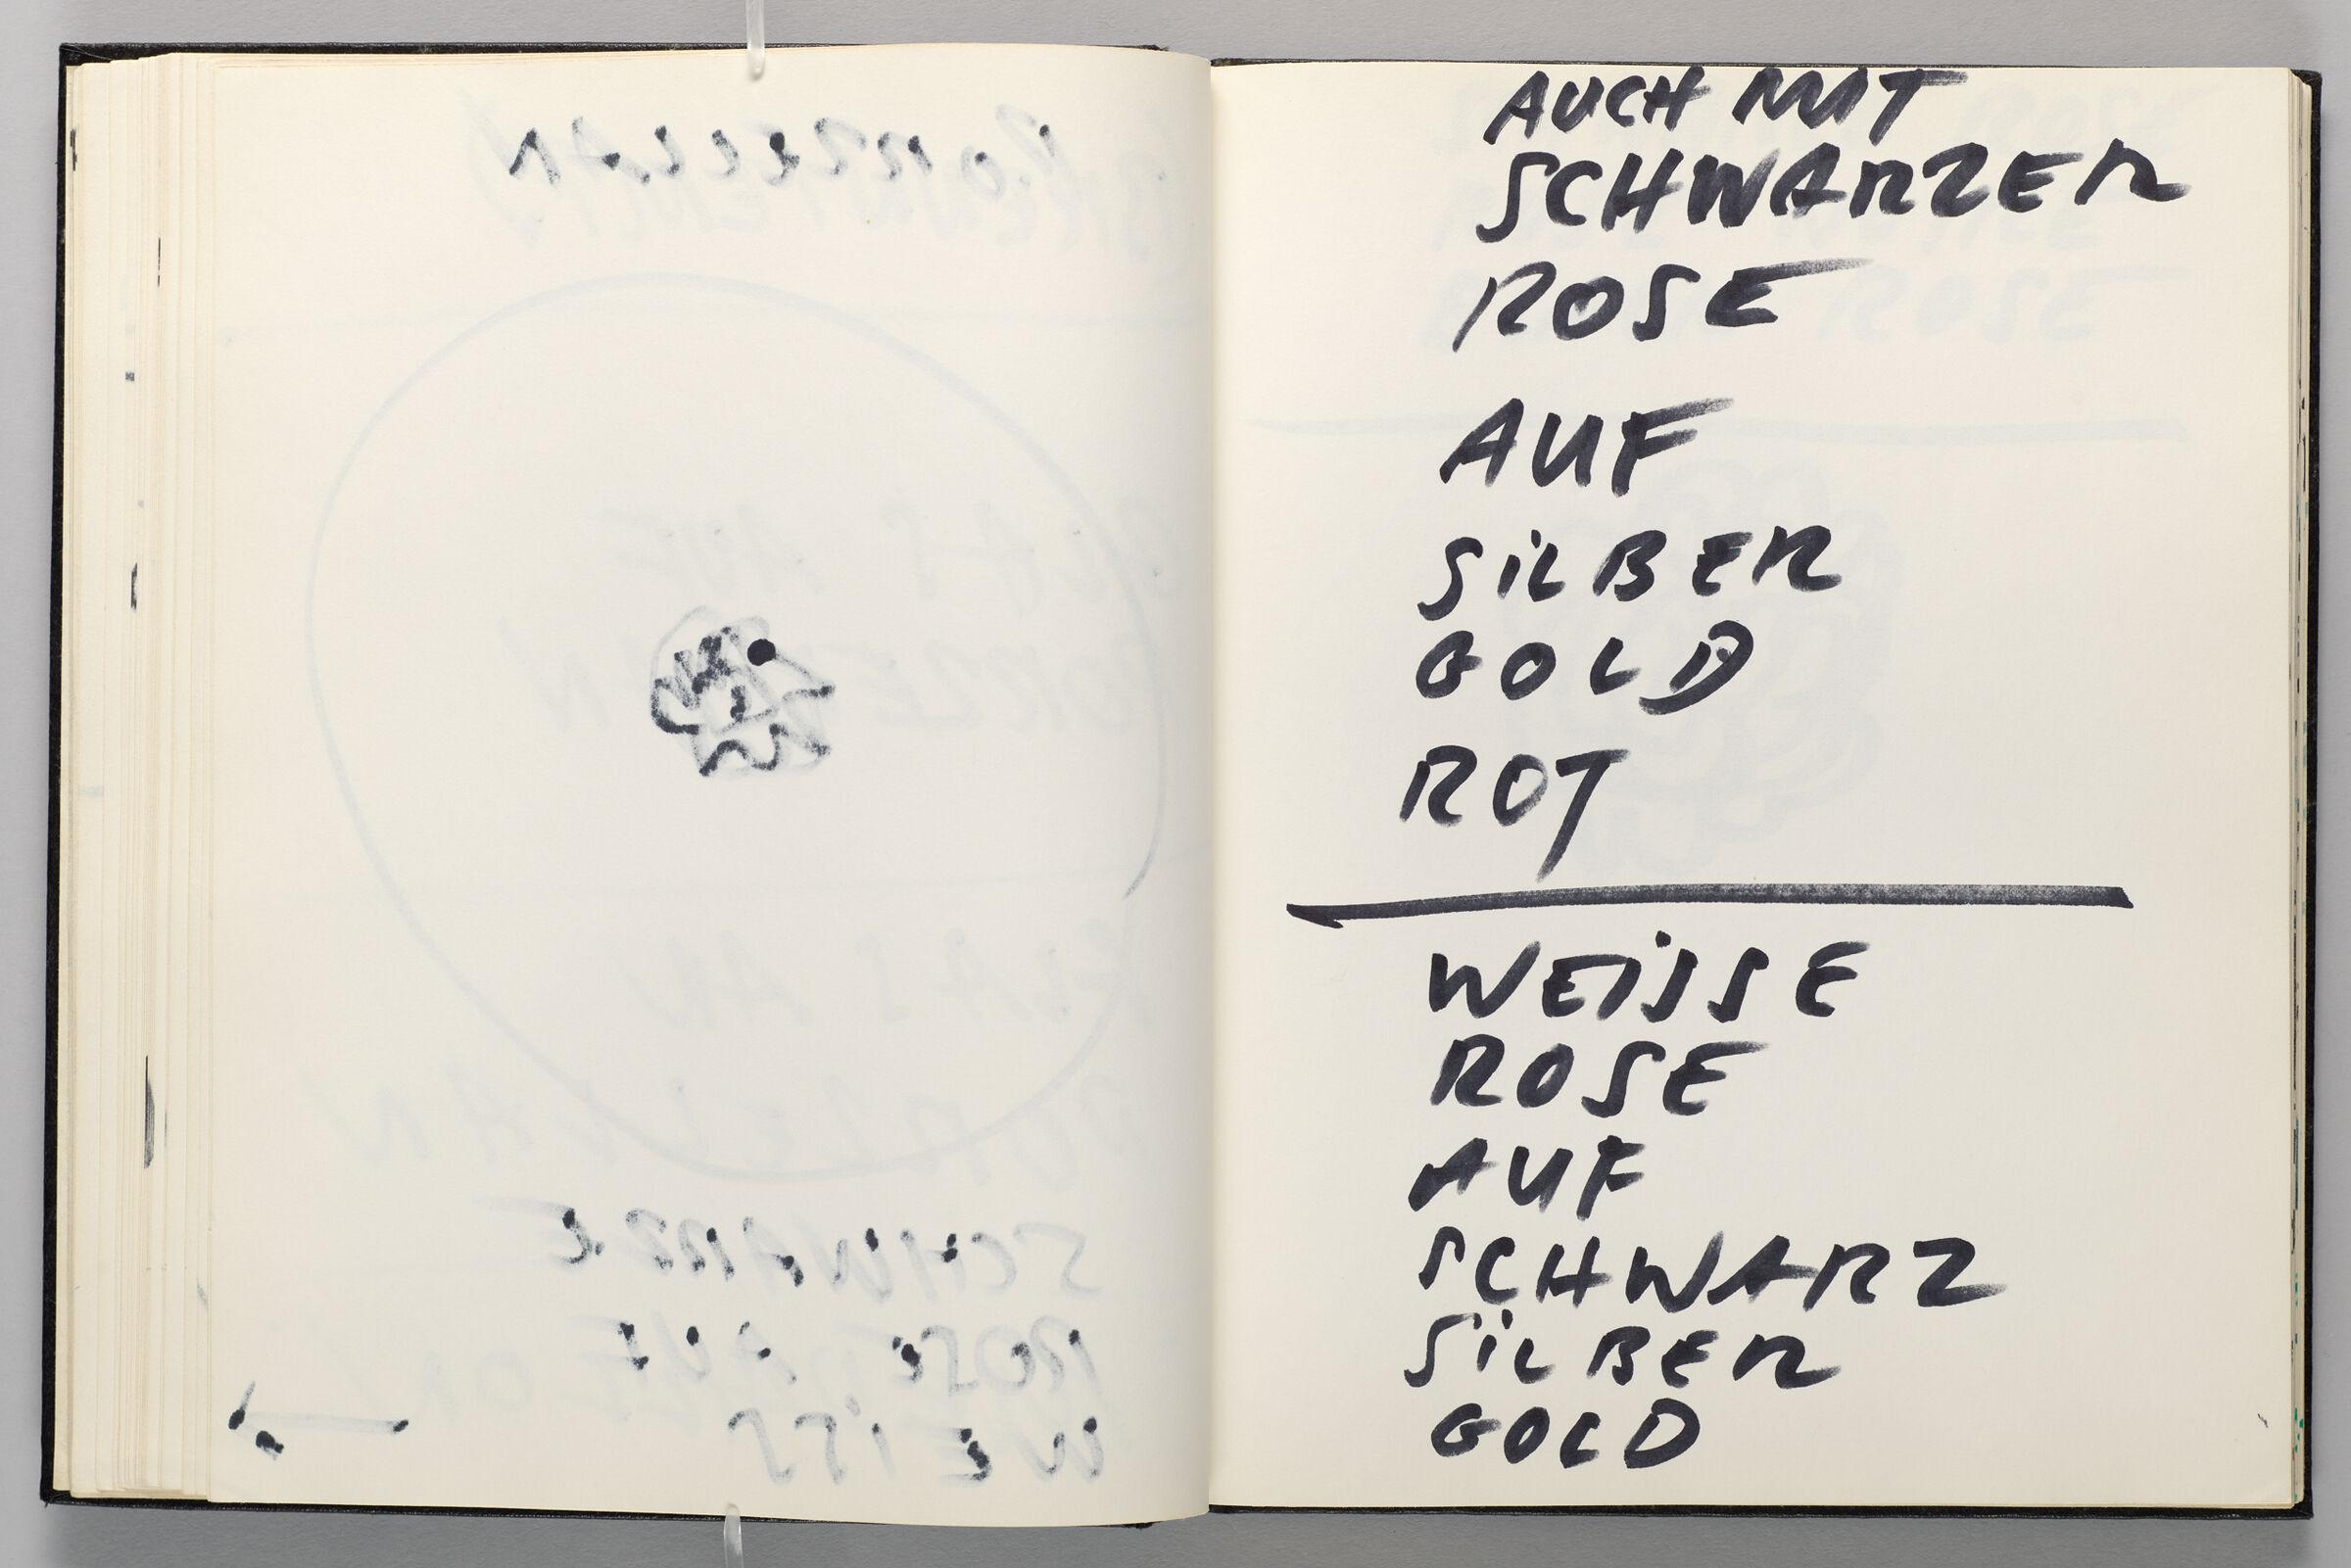 Untitled (Bleed-Through Of Previous Page, Left Page); Untitled (List For Glass Designs, Right Page)